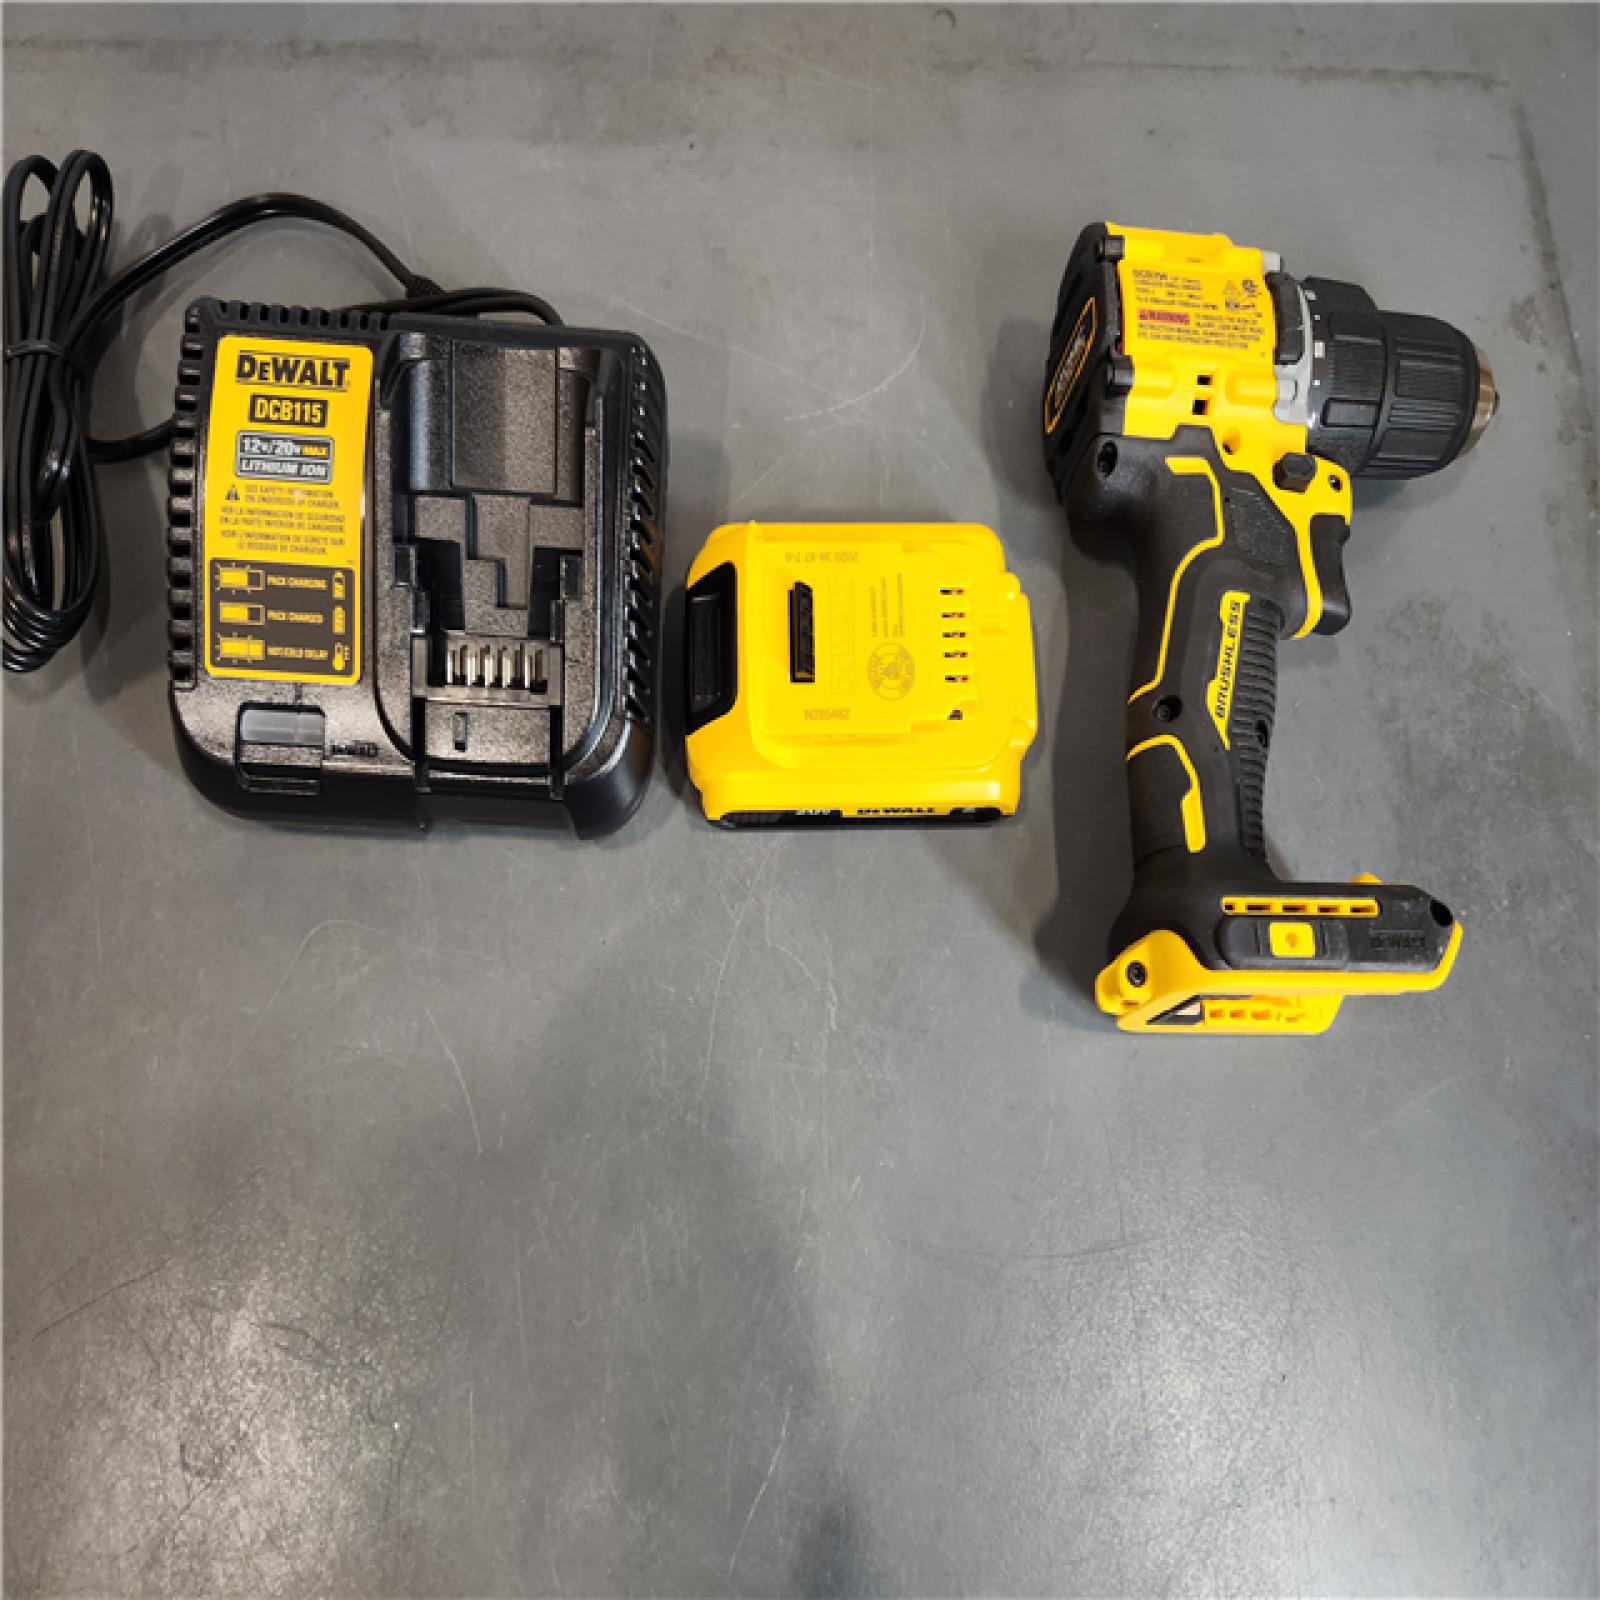 AS-IS Dewalt DCD794D1 20V MAX ATOMIC COMPACT SERIES Brushless Lithium-Ion 1/2 in. Cordless Drill Driver Kit (2 Ah)